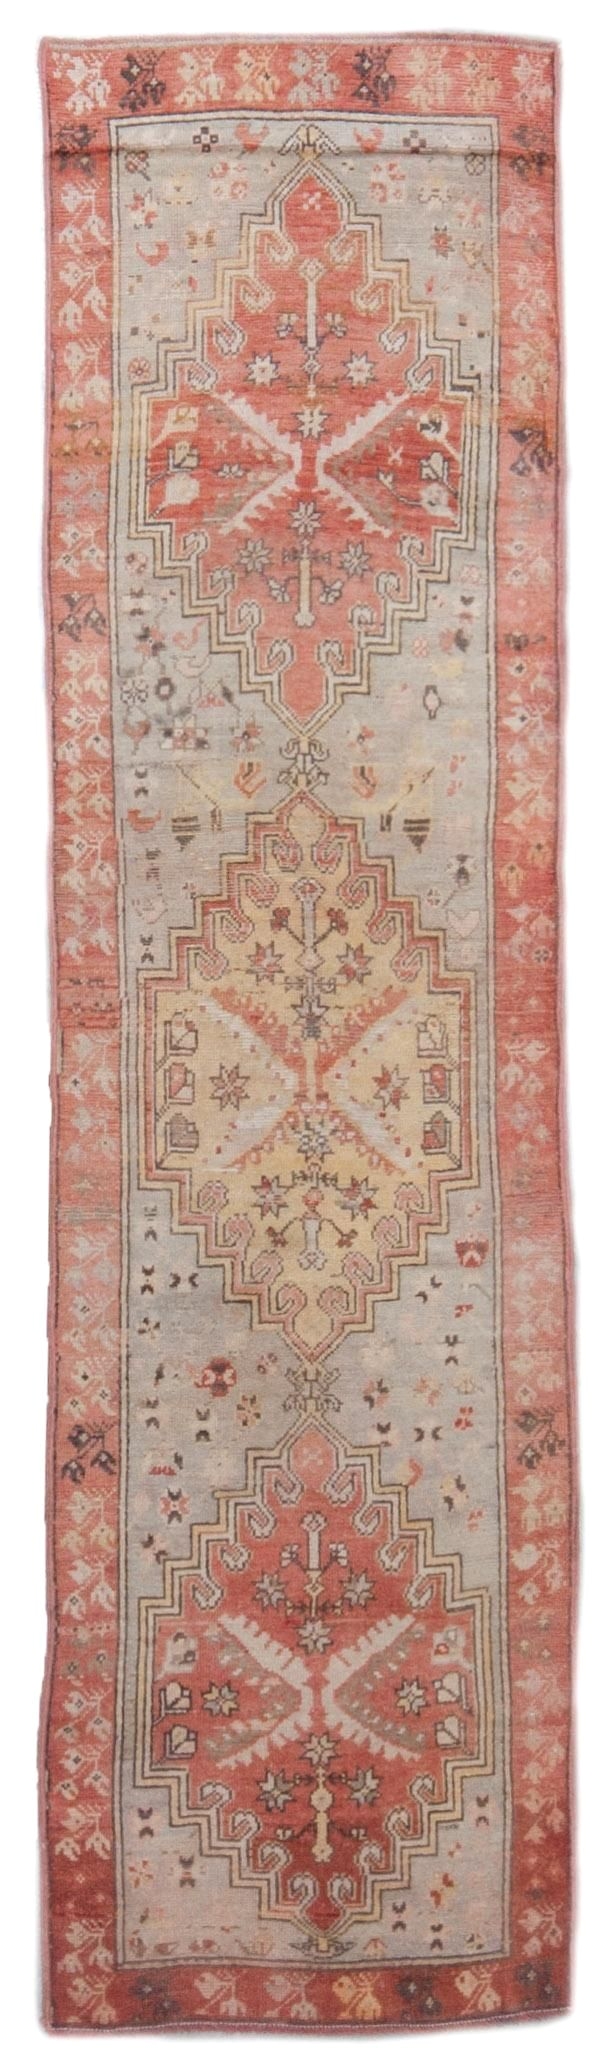 Nerdy area Rugs 119 Best Rugs Images On Pinterest Rugs Prayer Rug and Arquitetura